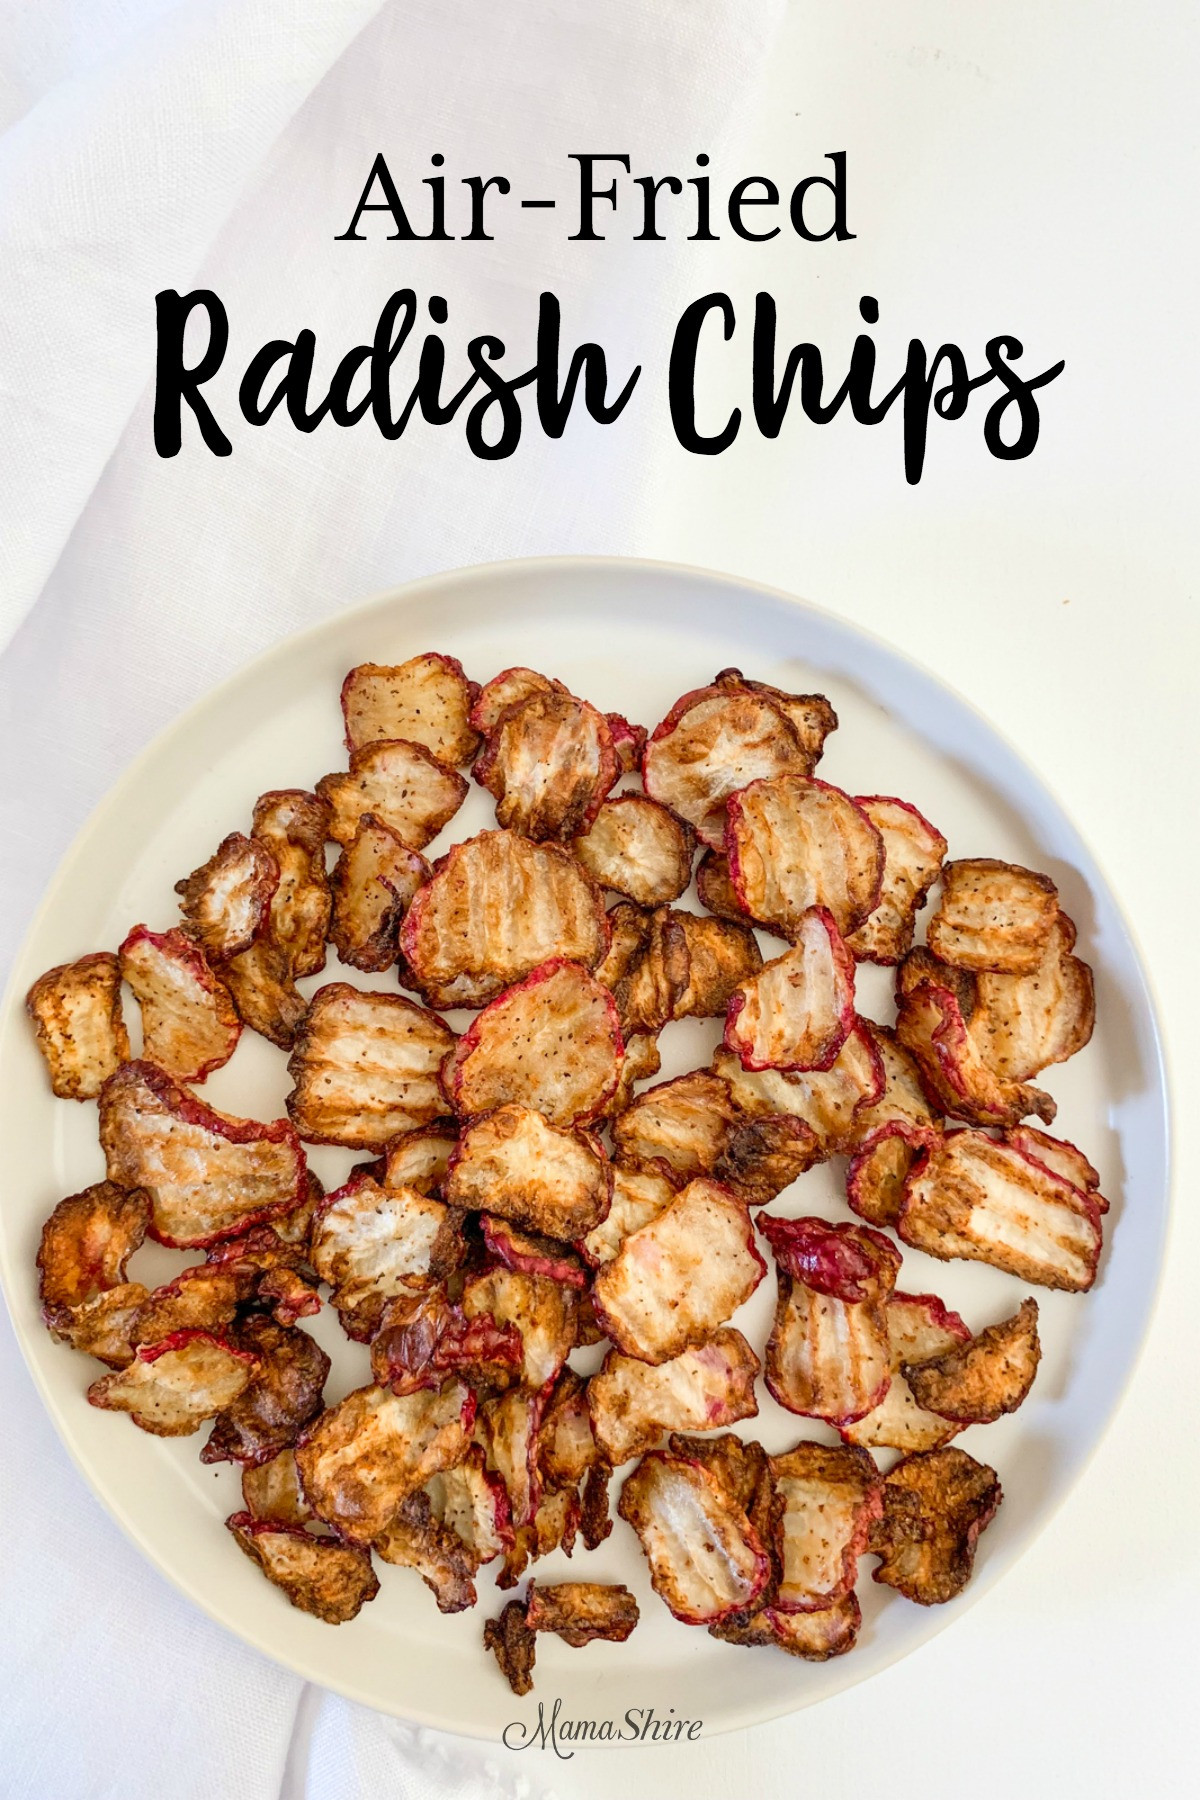 Air Fryer Recipes Healthy Low Carb Keto
 Low Carb Keto Air Fryer Radish Chips MamaShire